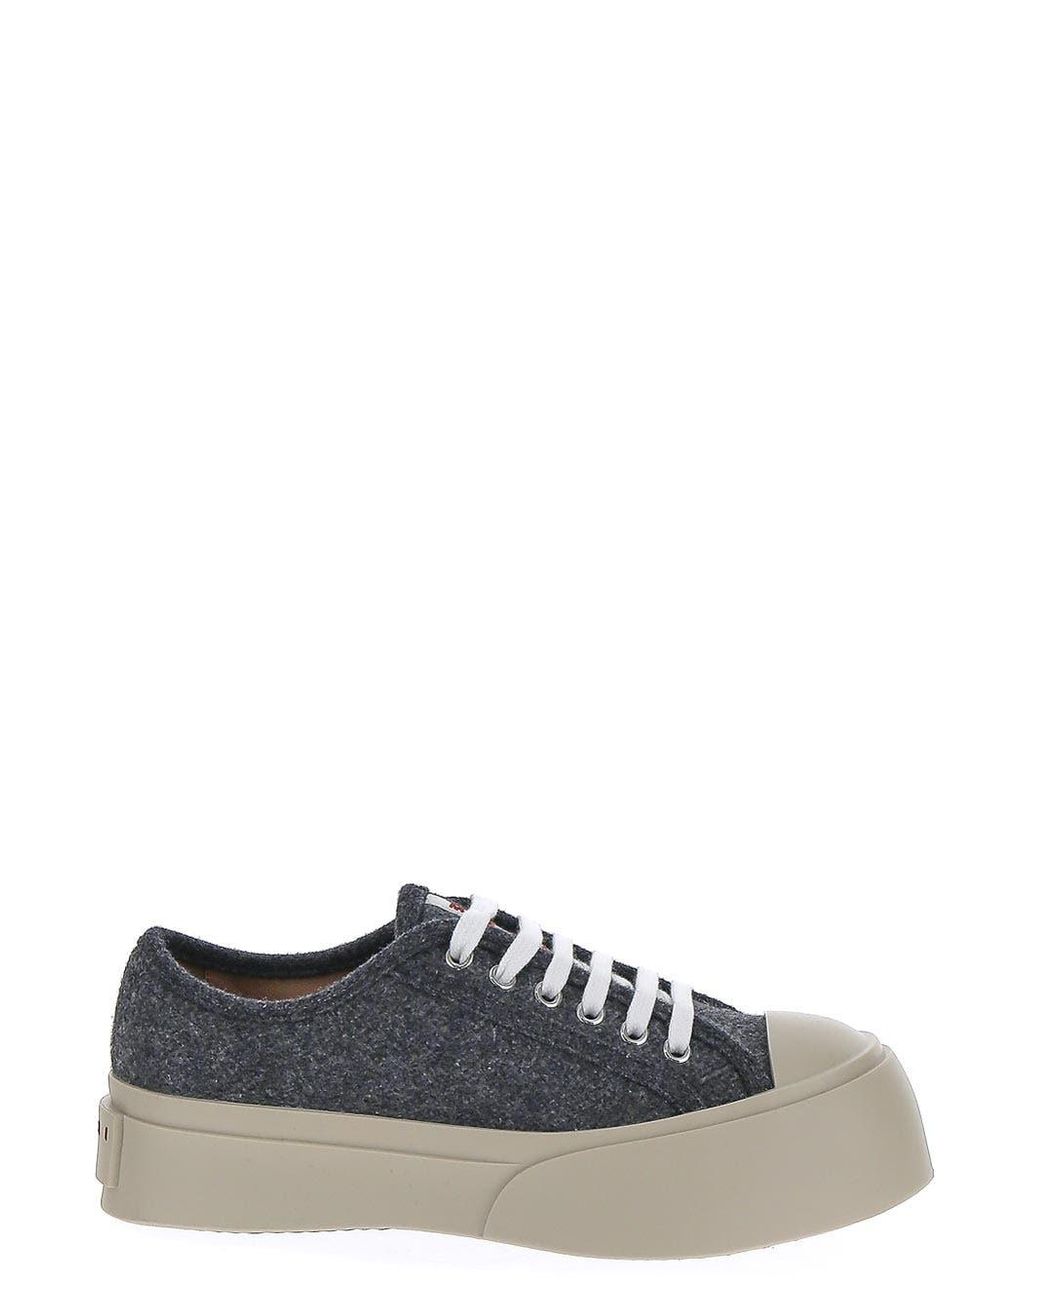 Marni Pablo Sneakers in Blue | Lyst